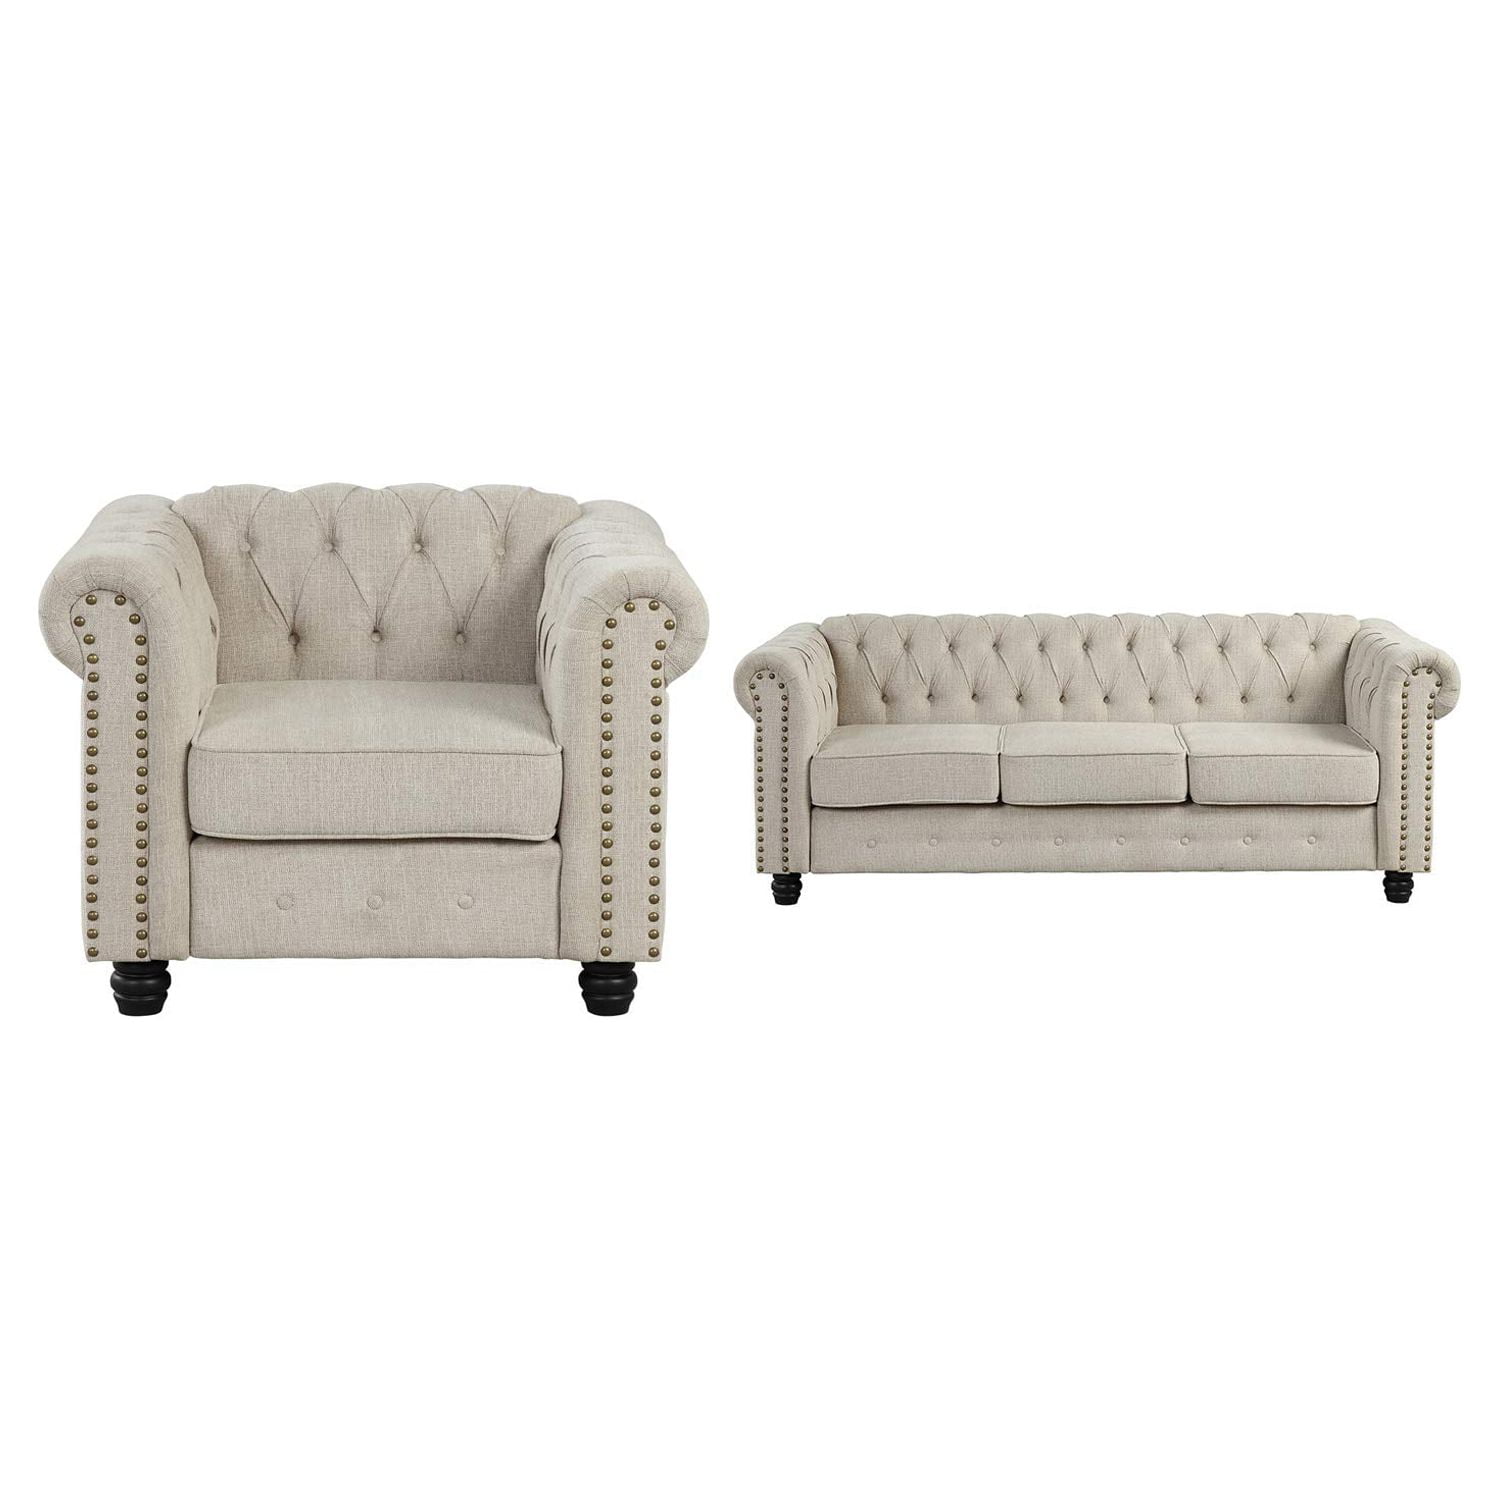 Morden Fort Linen Couches for Living Room Sets, Chair, Loveseat